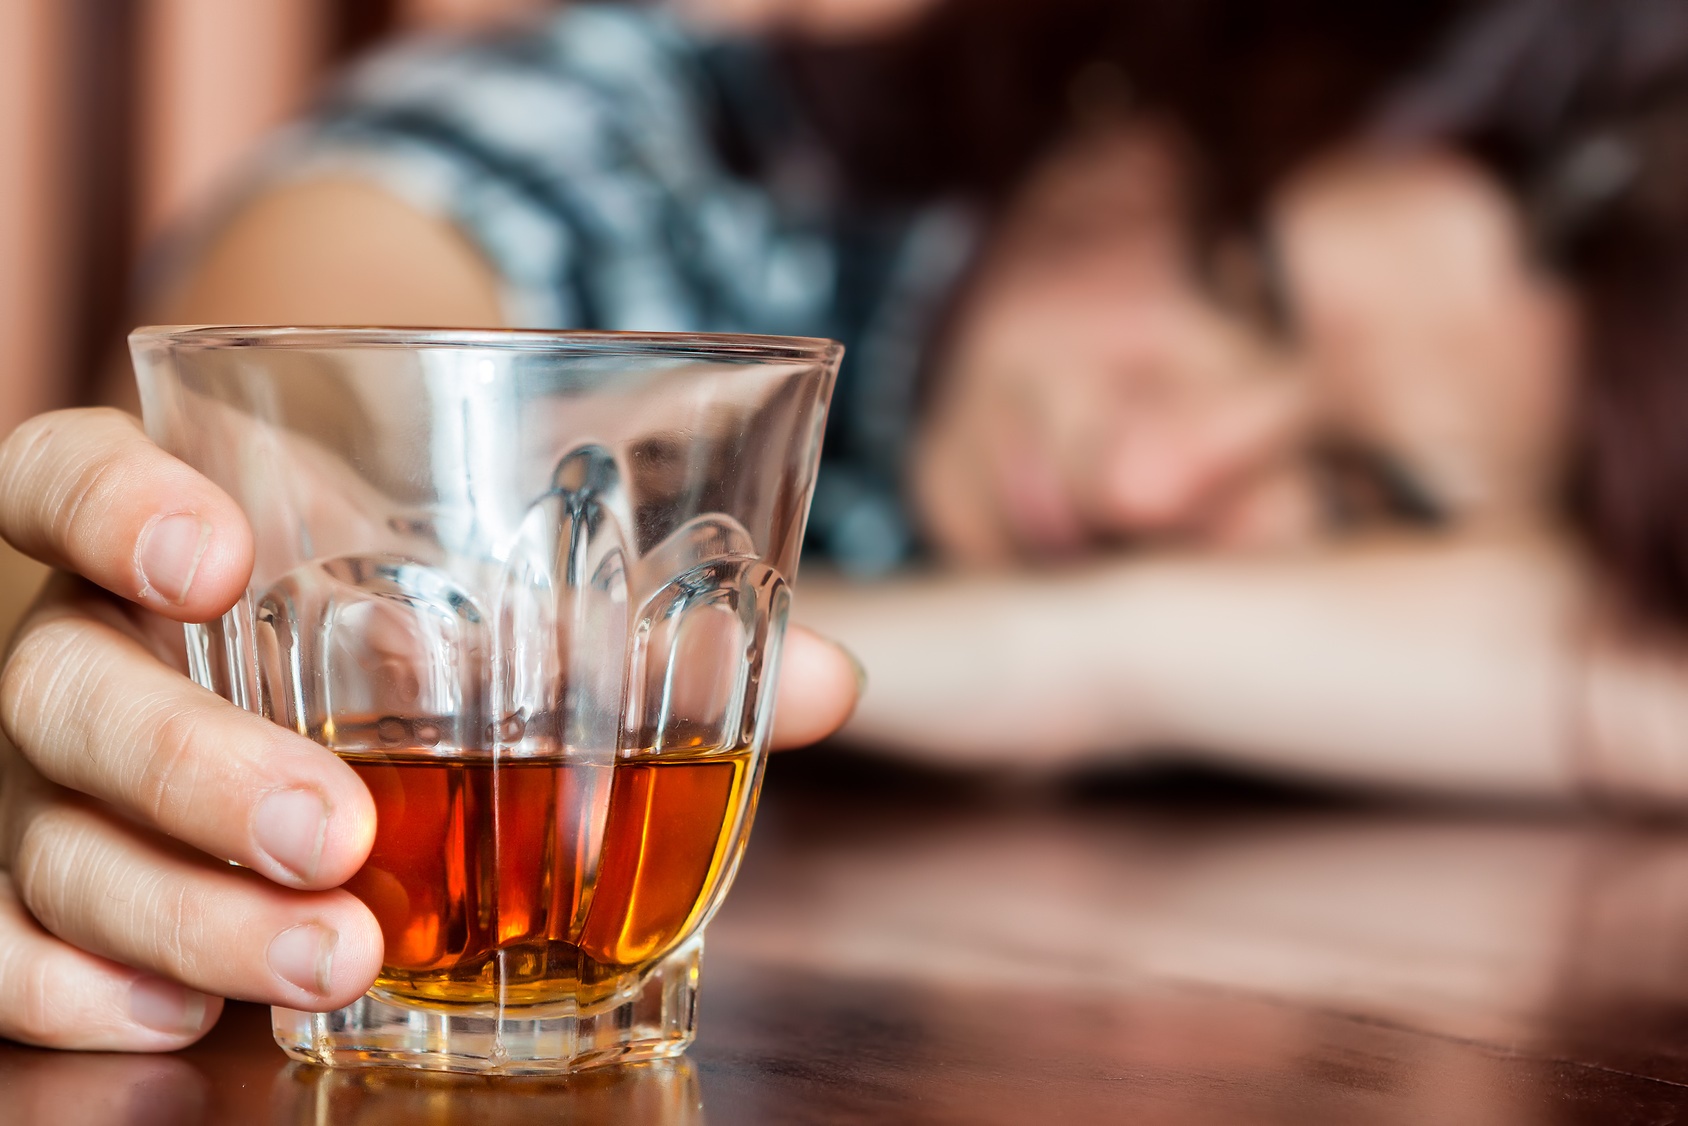 how to help someone who has alcohol poisoning